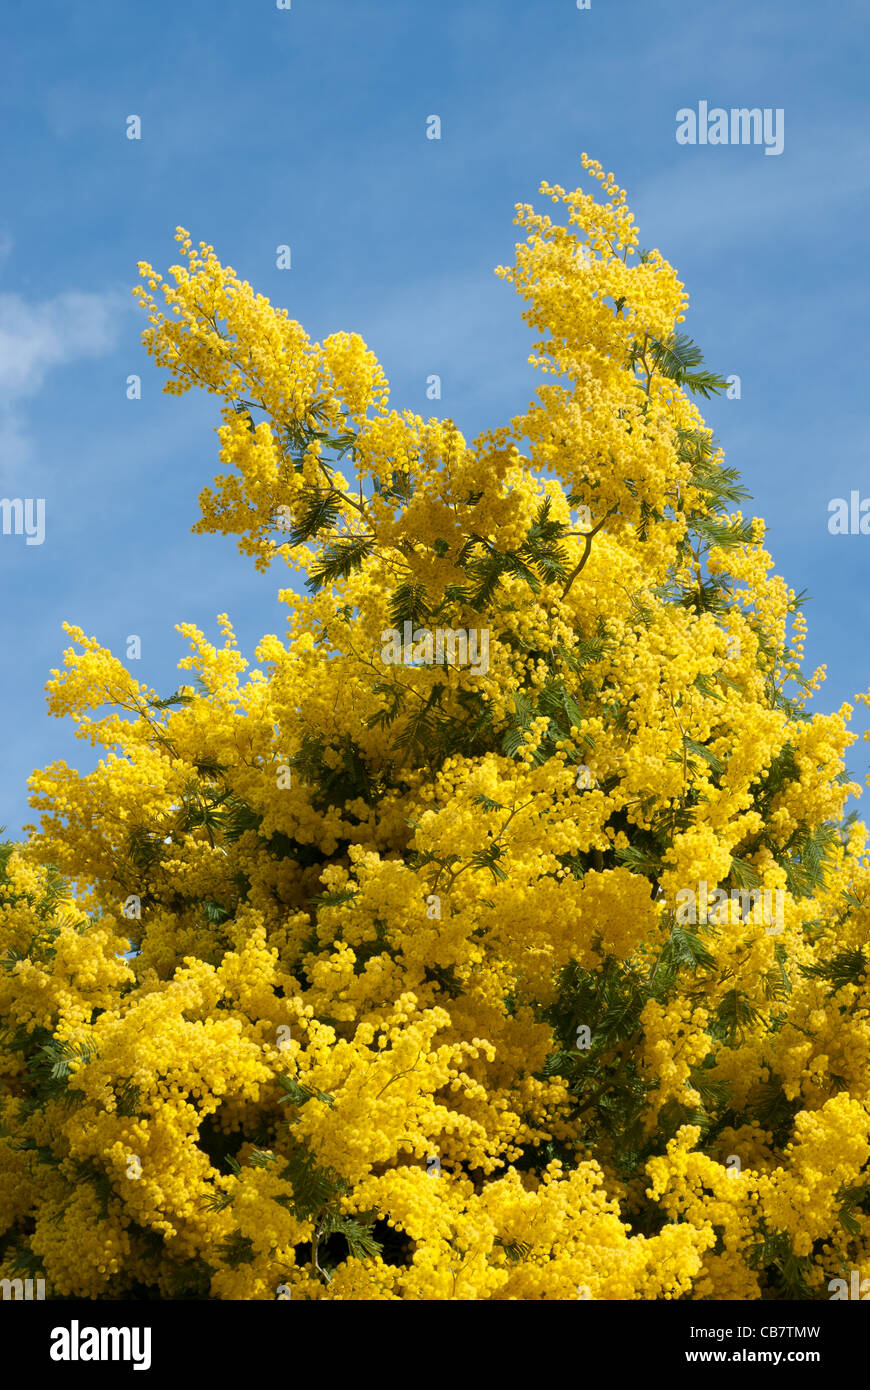 Mimosa photographed from below with blue sky Stock Photo